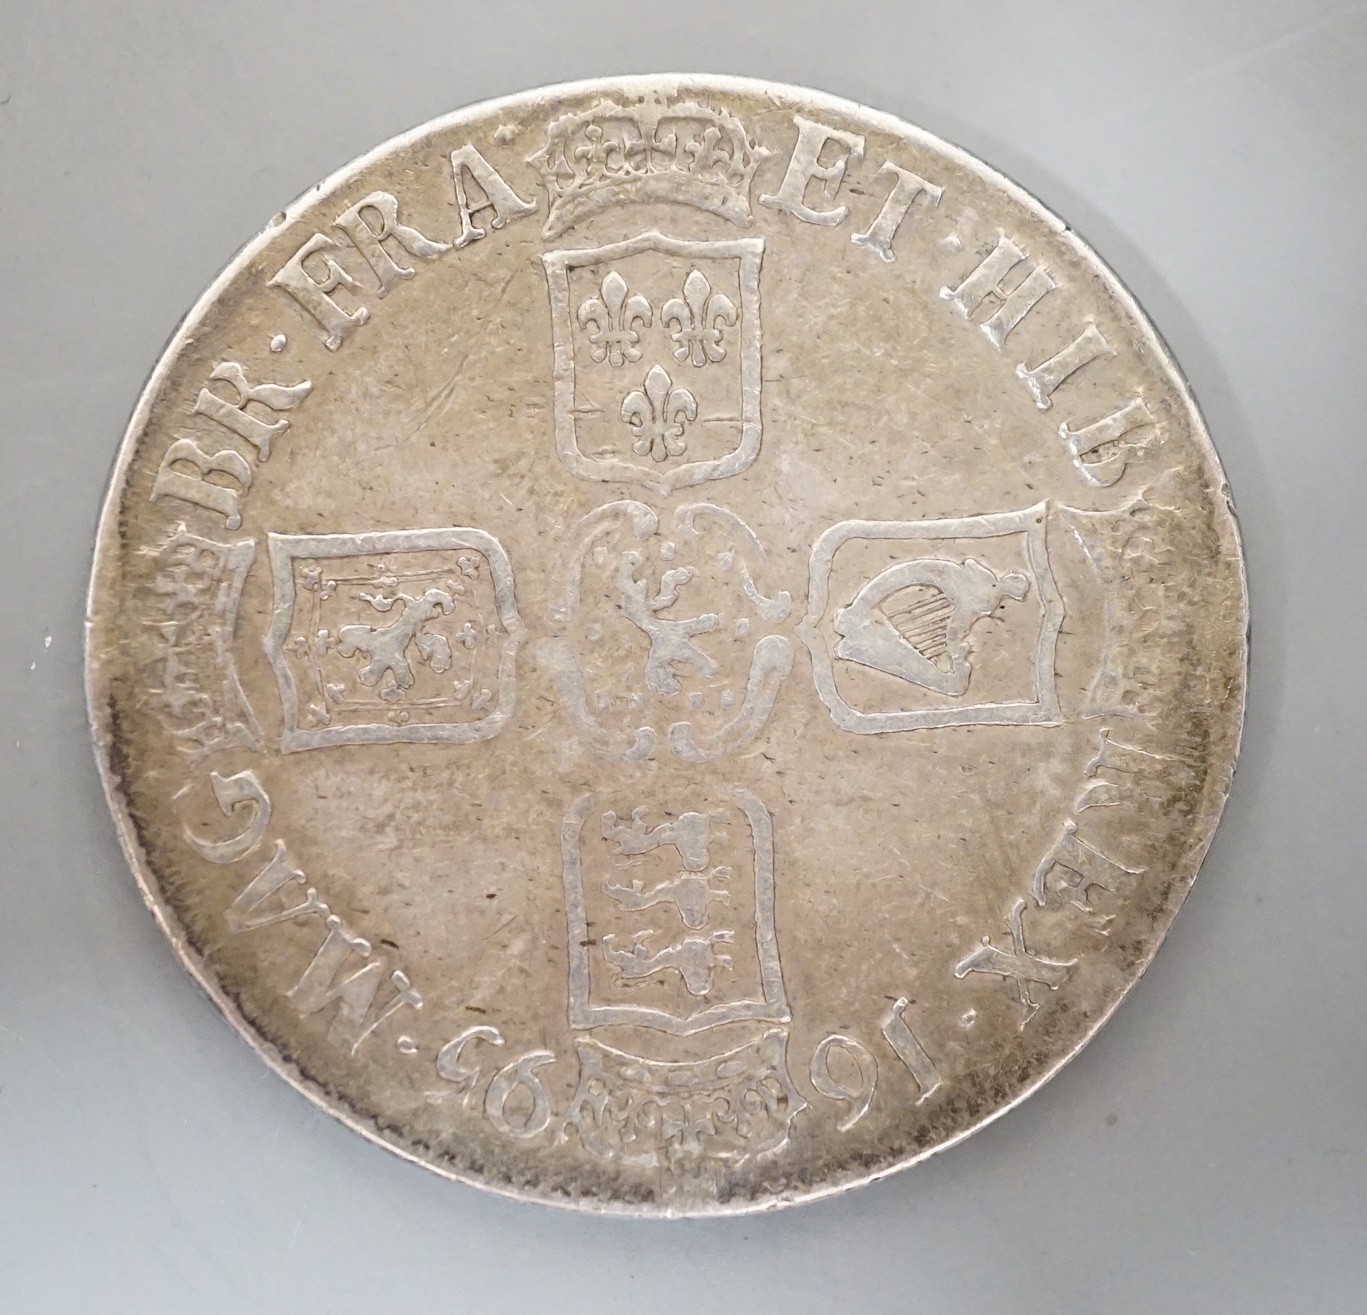 A William III crown, 1695, F or better